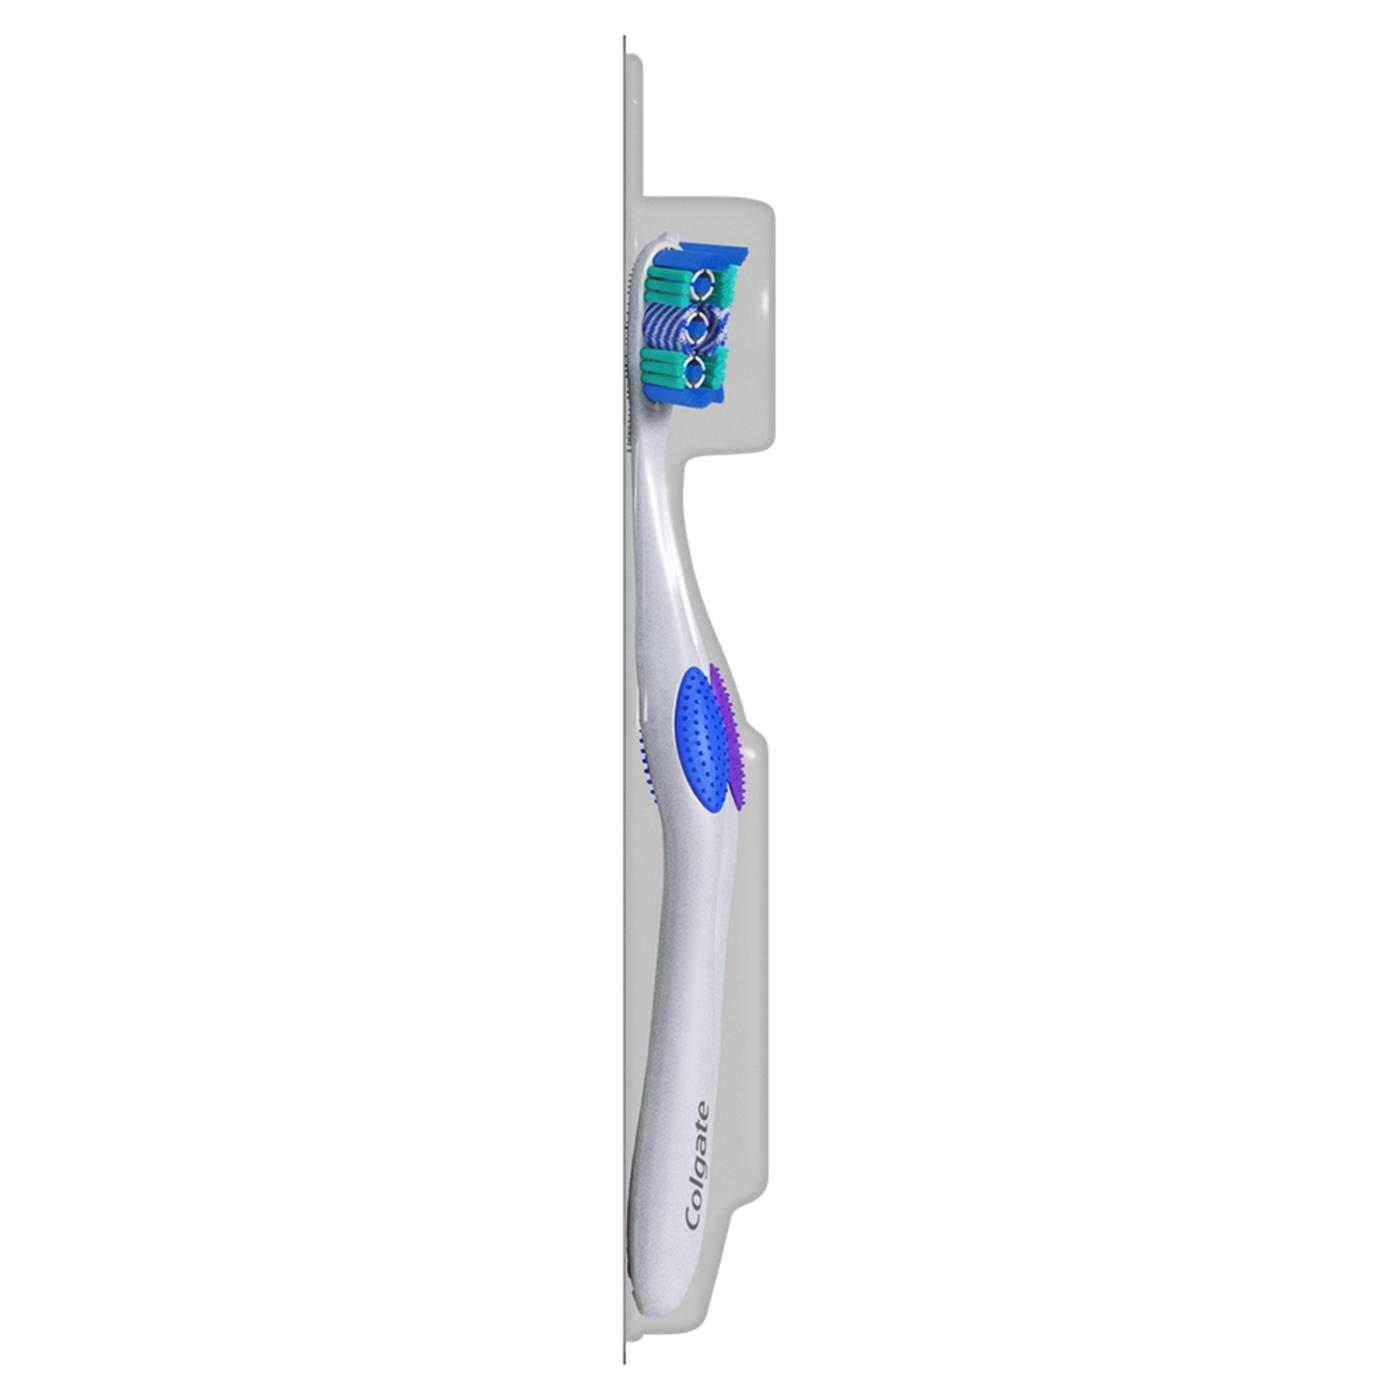 Colgate 360 Optic White Toothbrushes - Soft; image 5 of 11